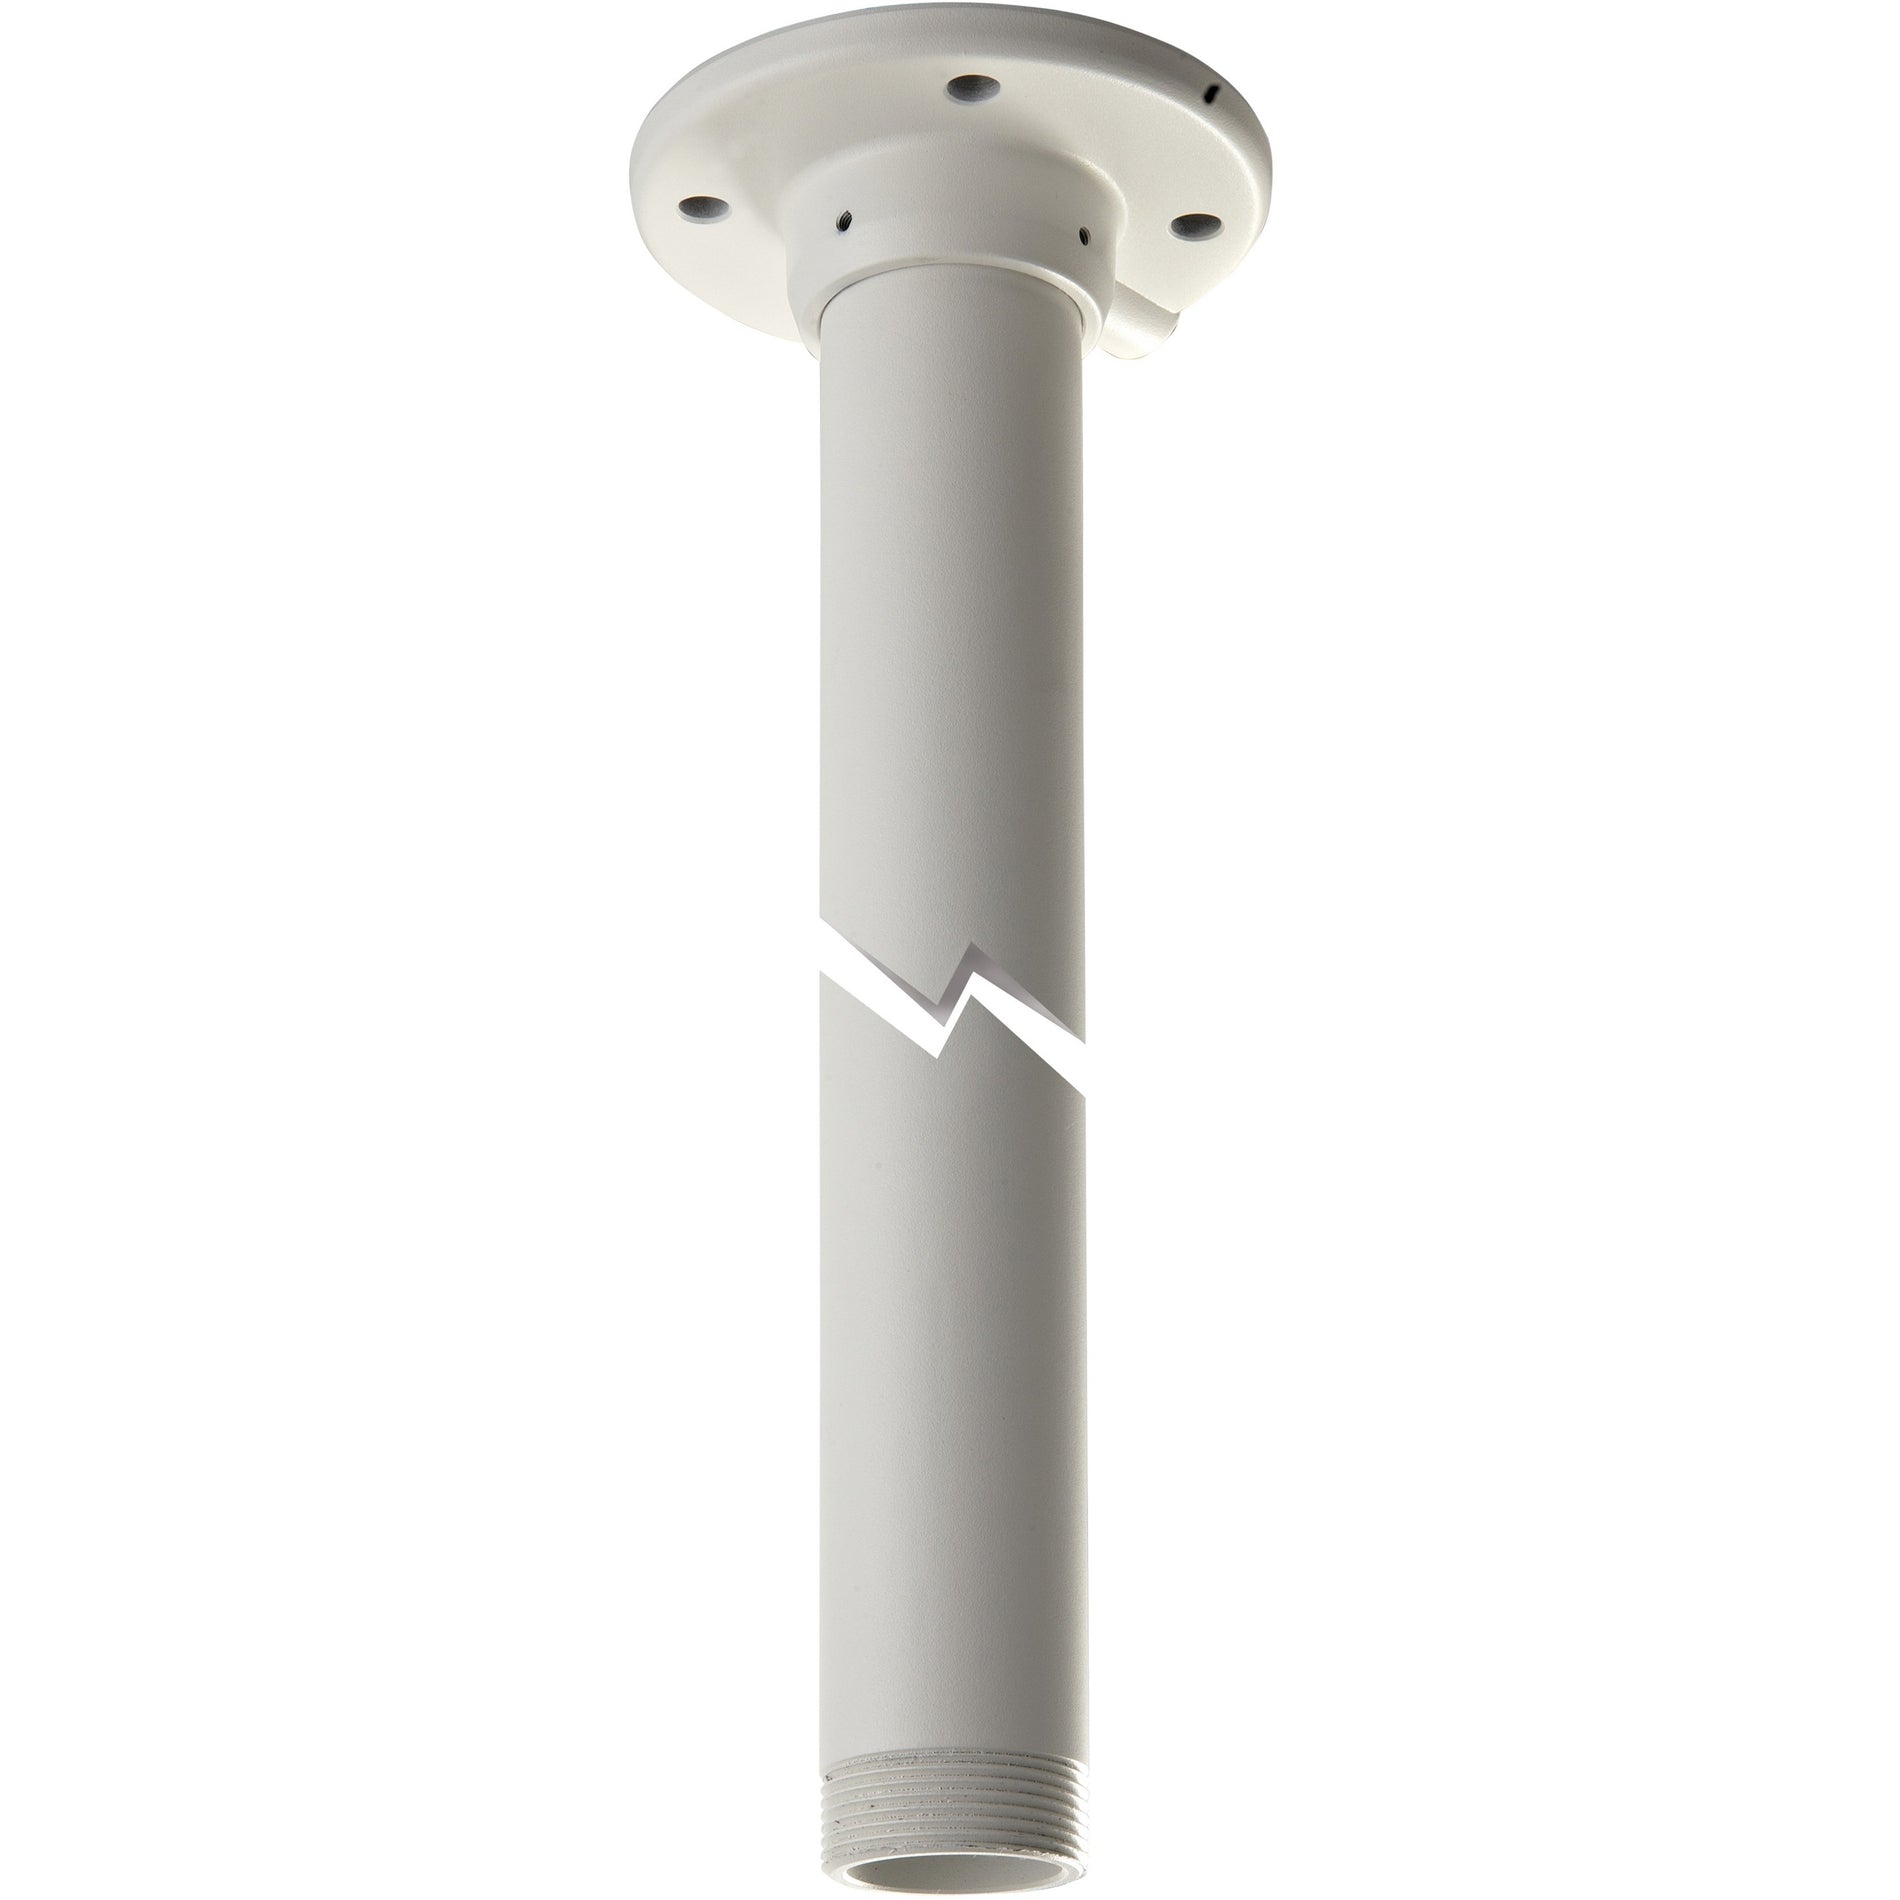 Hikvision CPM Ceiling Mount for Network Camera, Off White